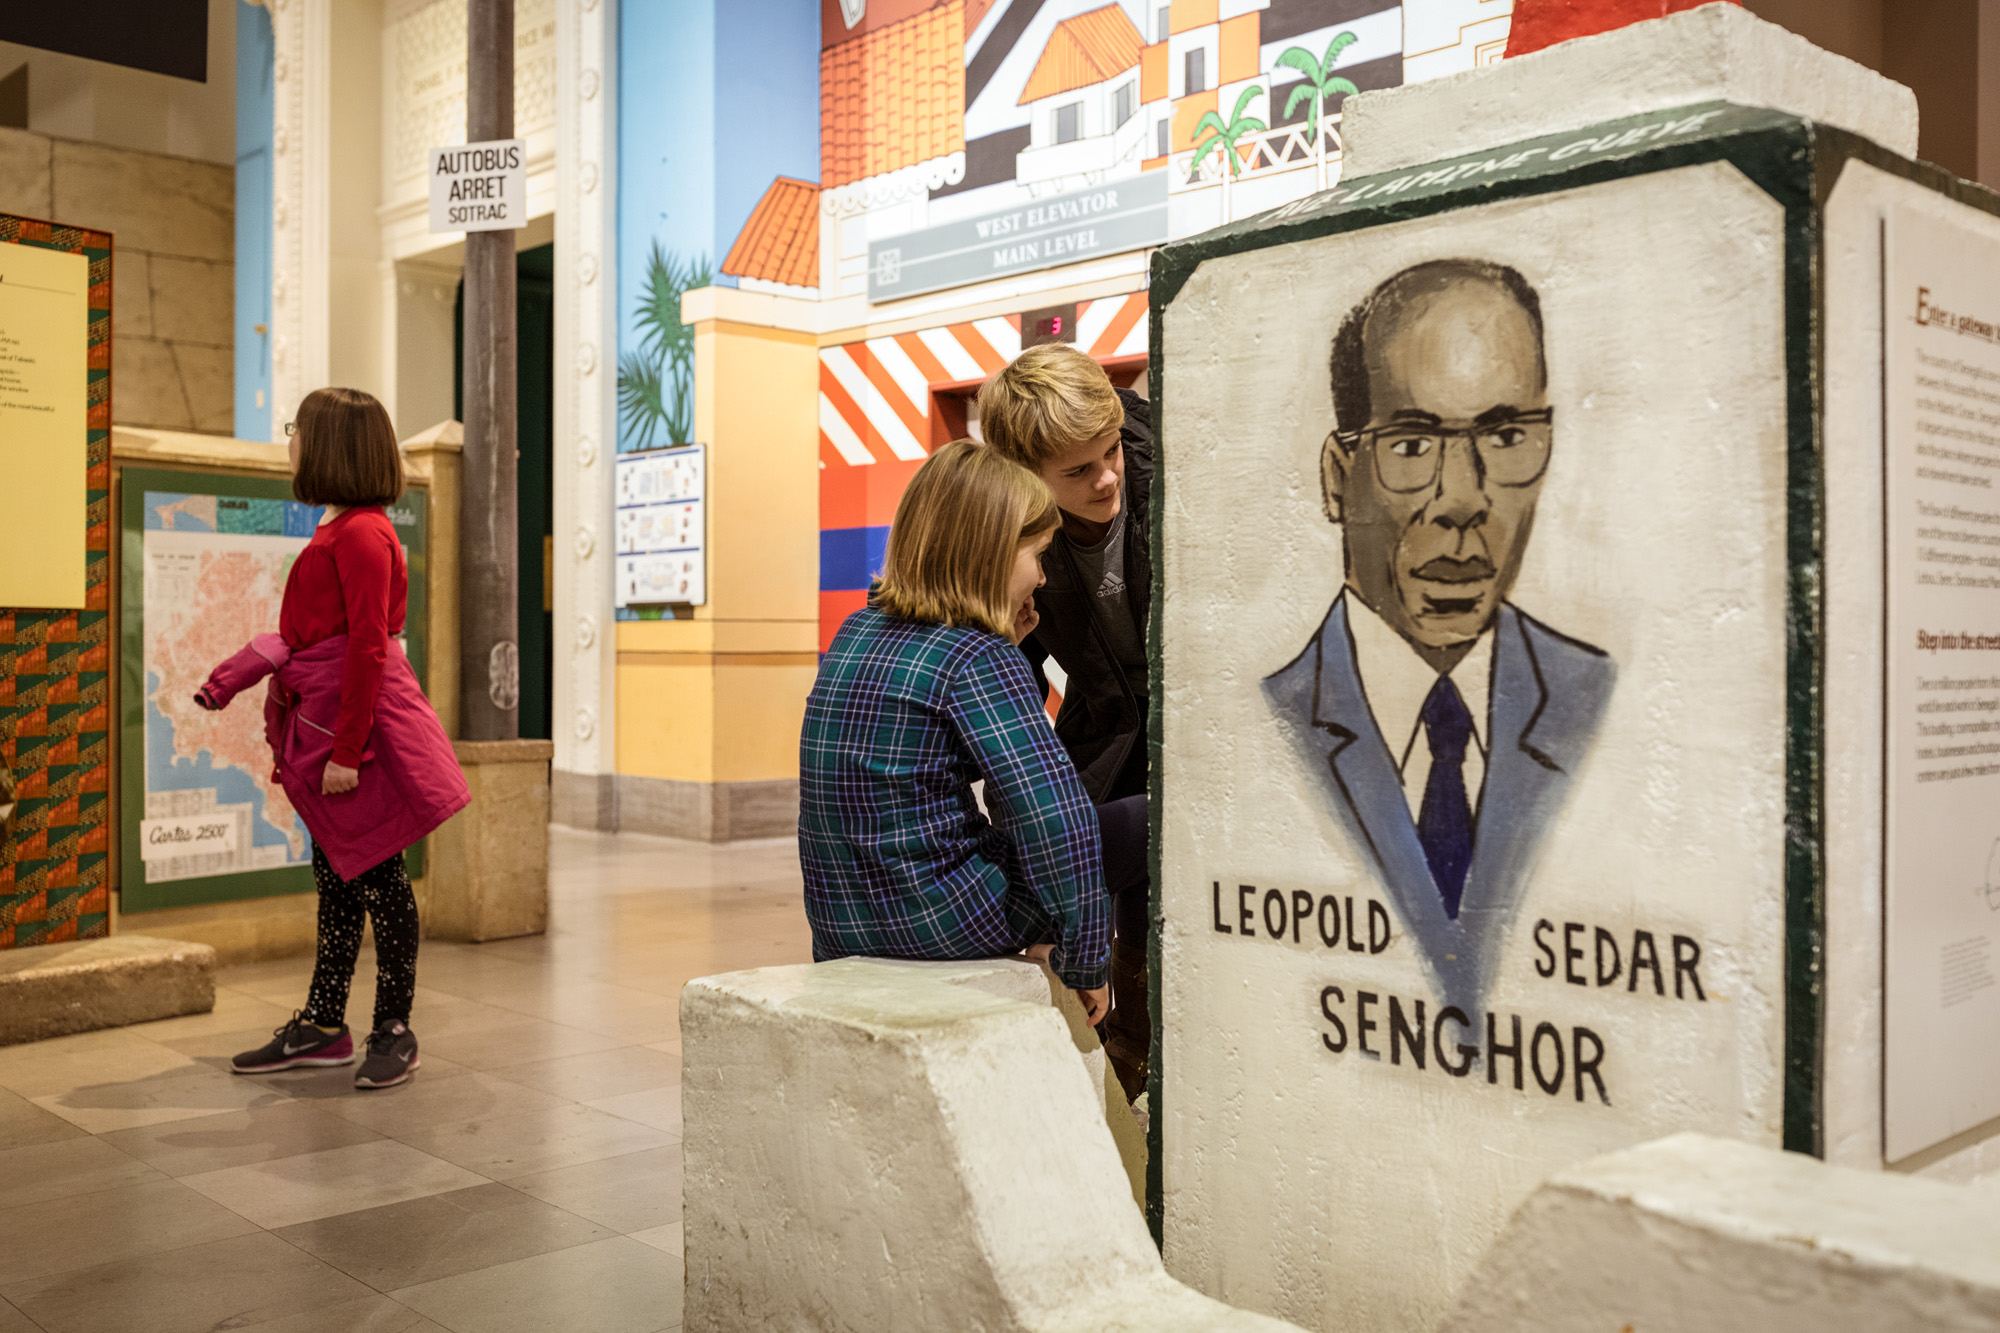 Three children explore near the entrance to the Africa exhibition. In the foreground is a sign with a drawing of the bust of a man wearing glasses and a suit and tie with the words “Leopold Sedar Senghor” written underneath.